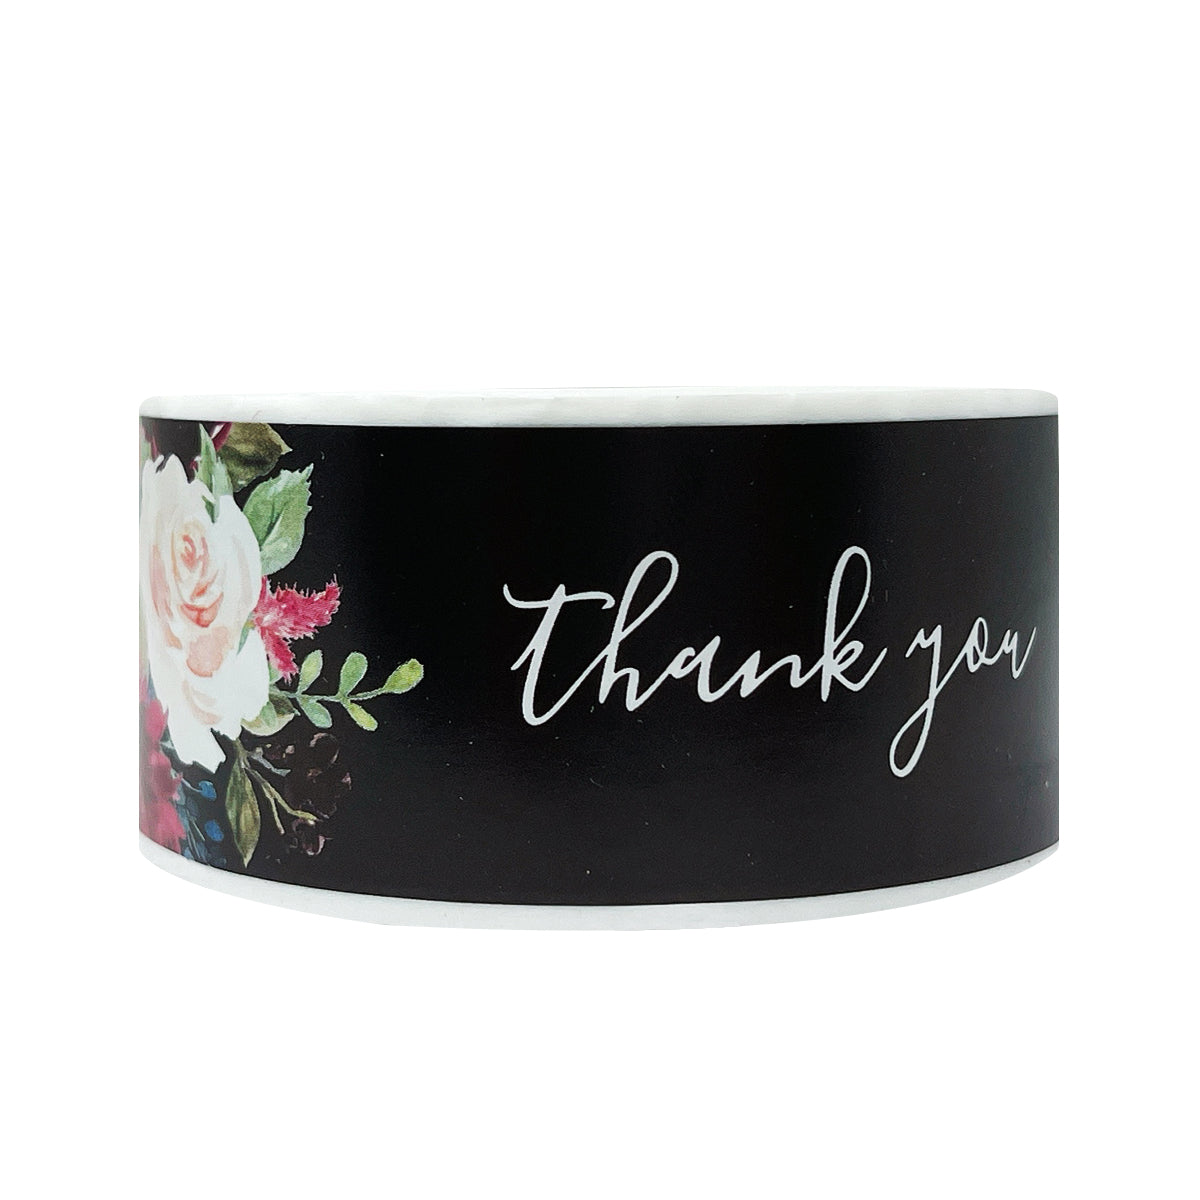 Wrapables 3" x 1" Small Business Thank You Stickers Roll, Sealing Stickers and Labels for Boxes, Envelopes, Bags, Packages